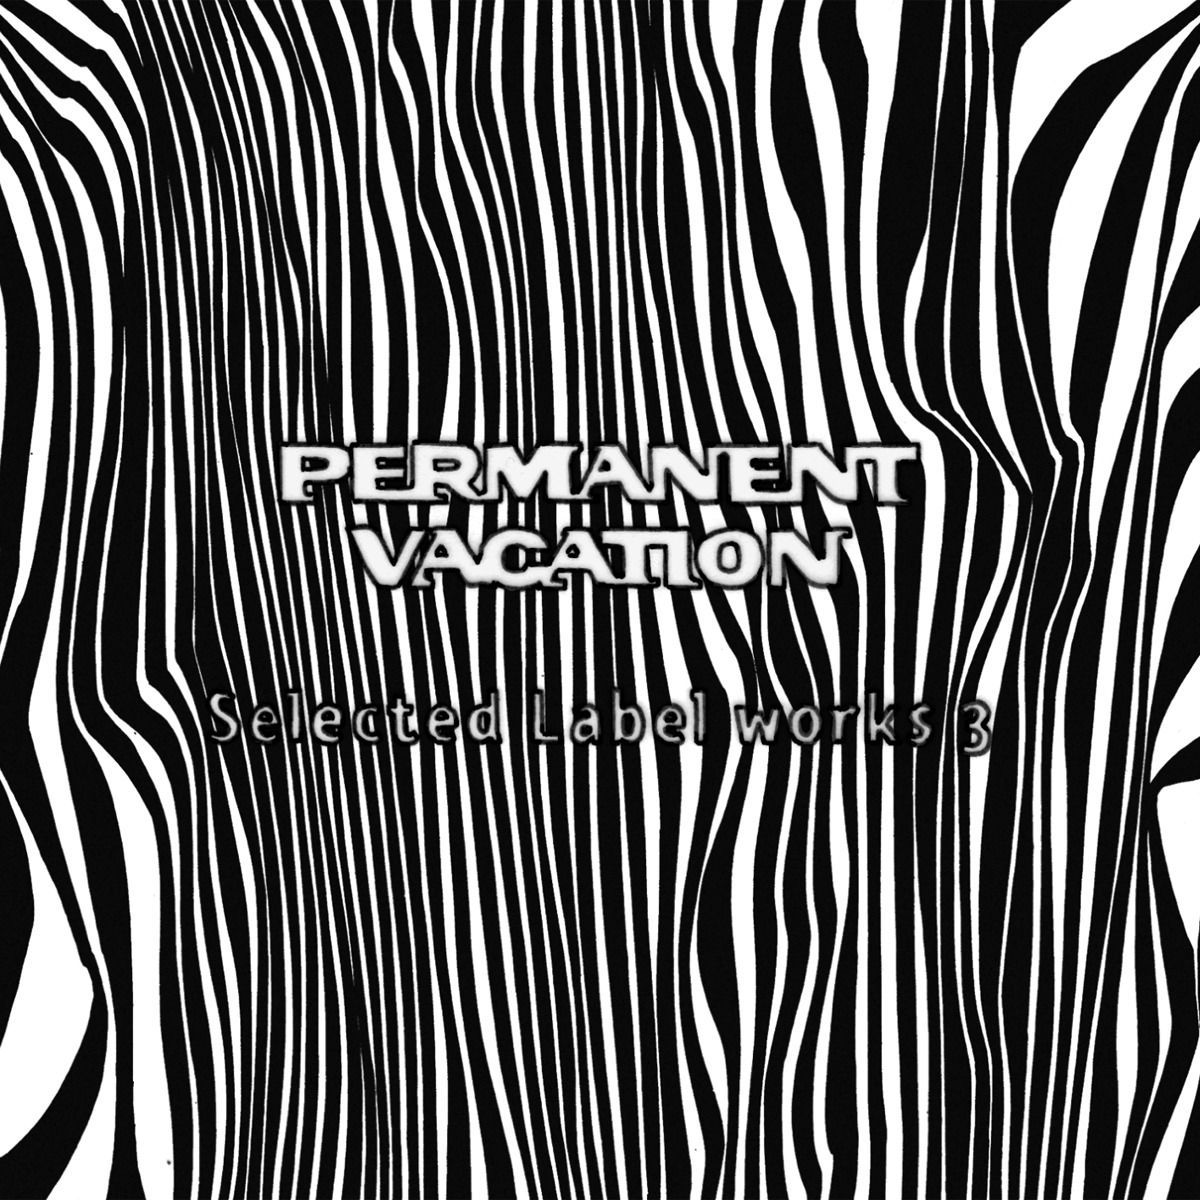 PERMANENT VACATION SELECTED LABEL WORKS 3